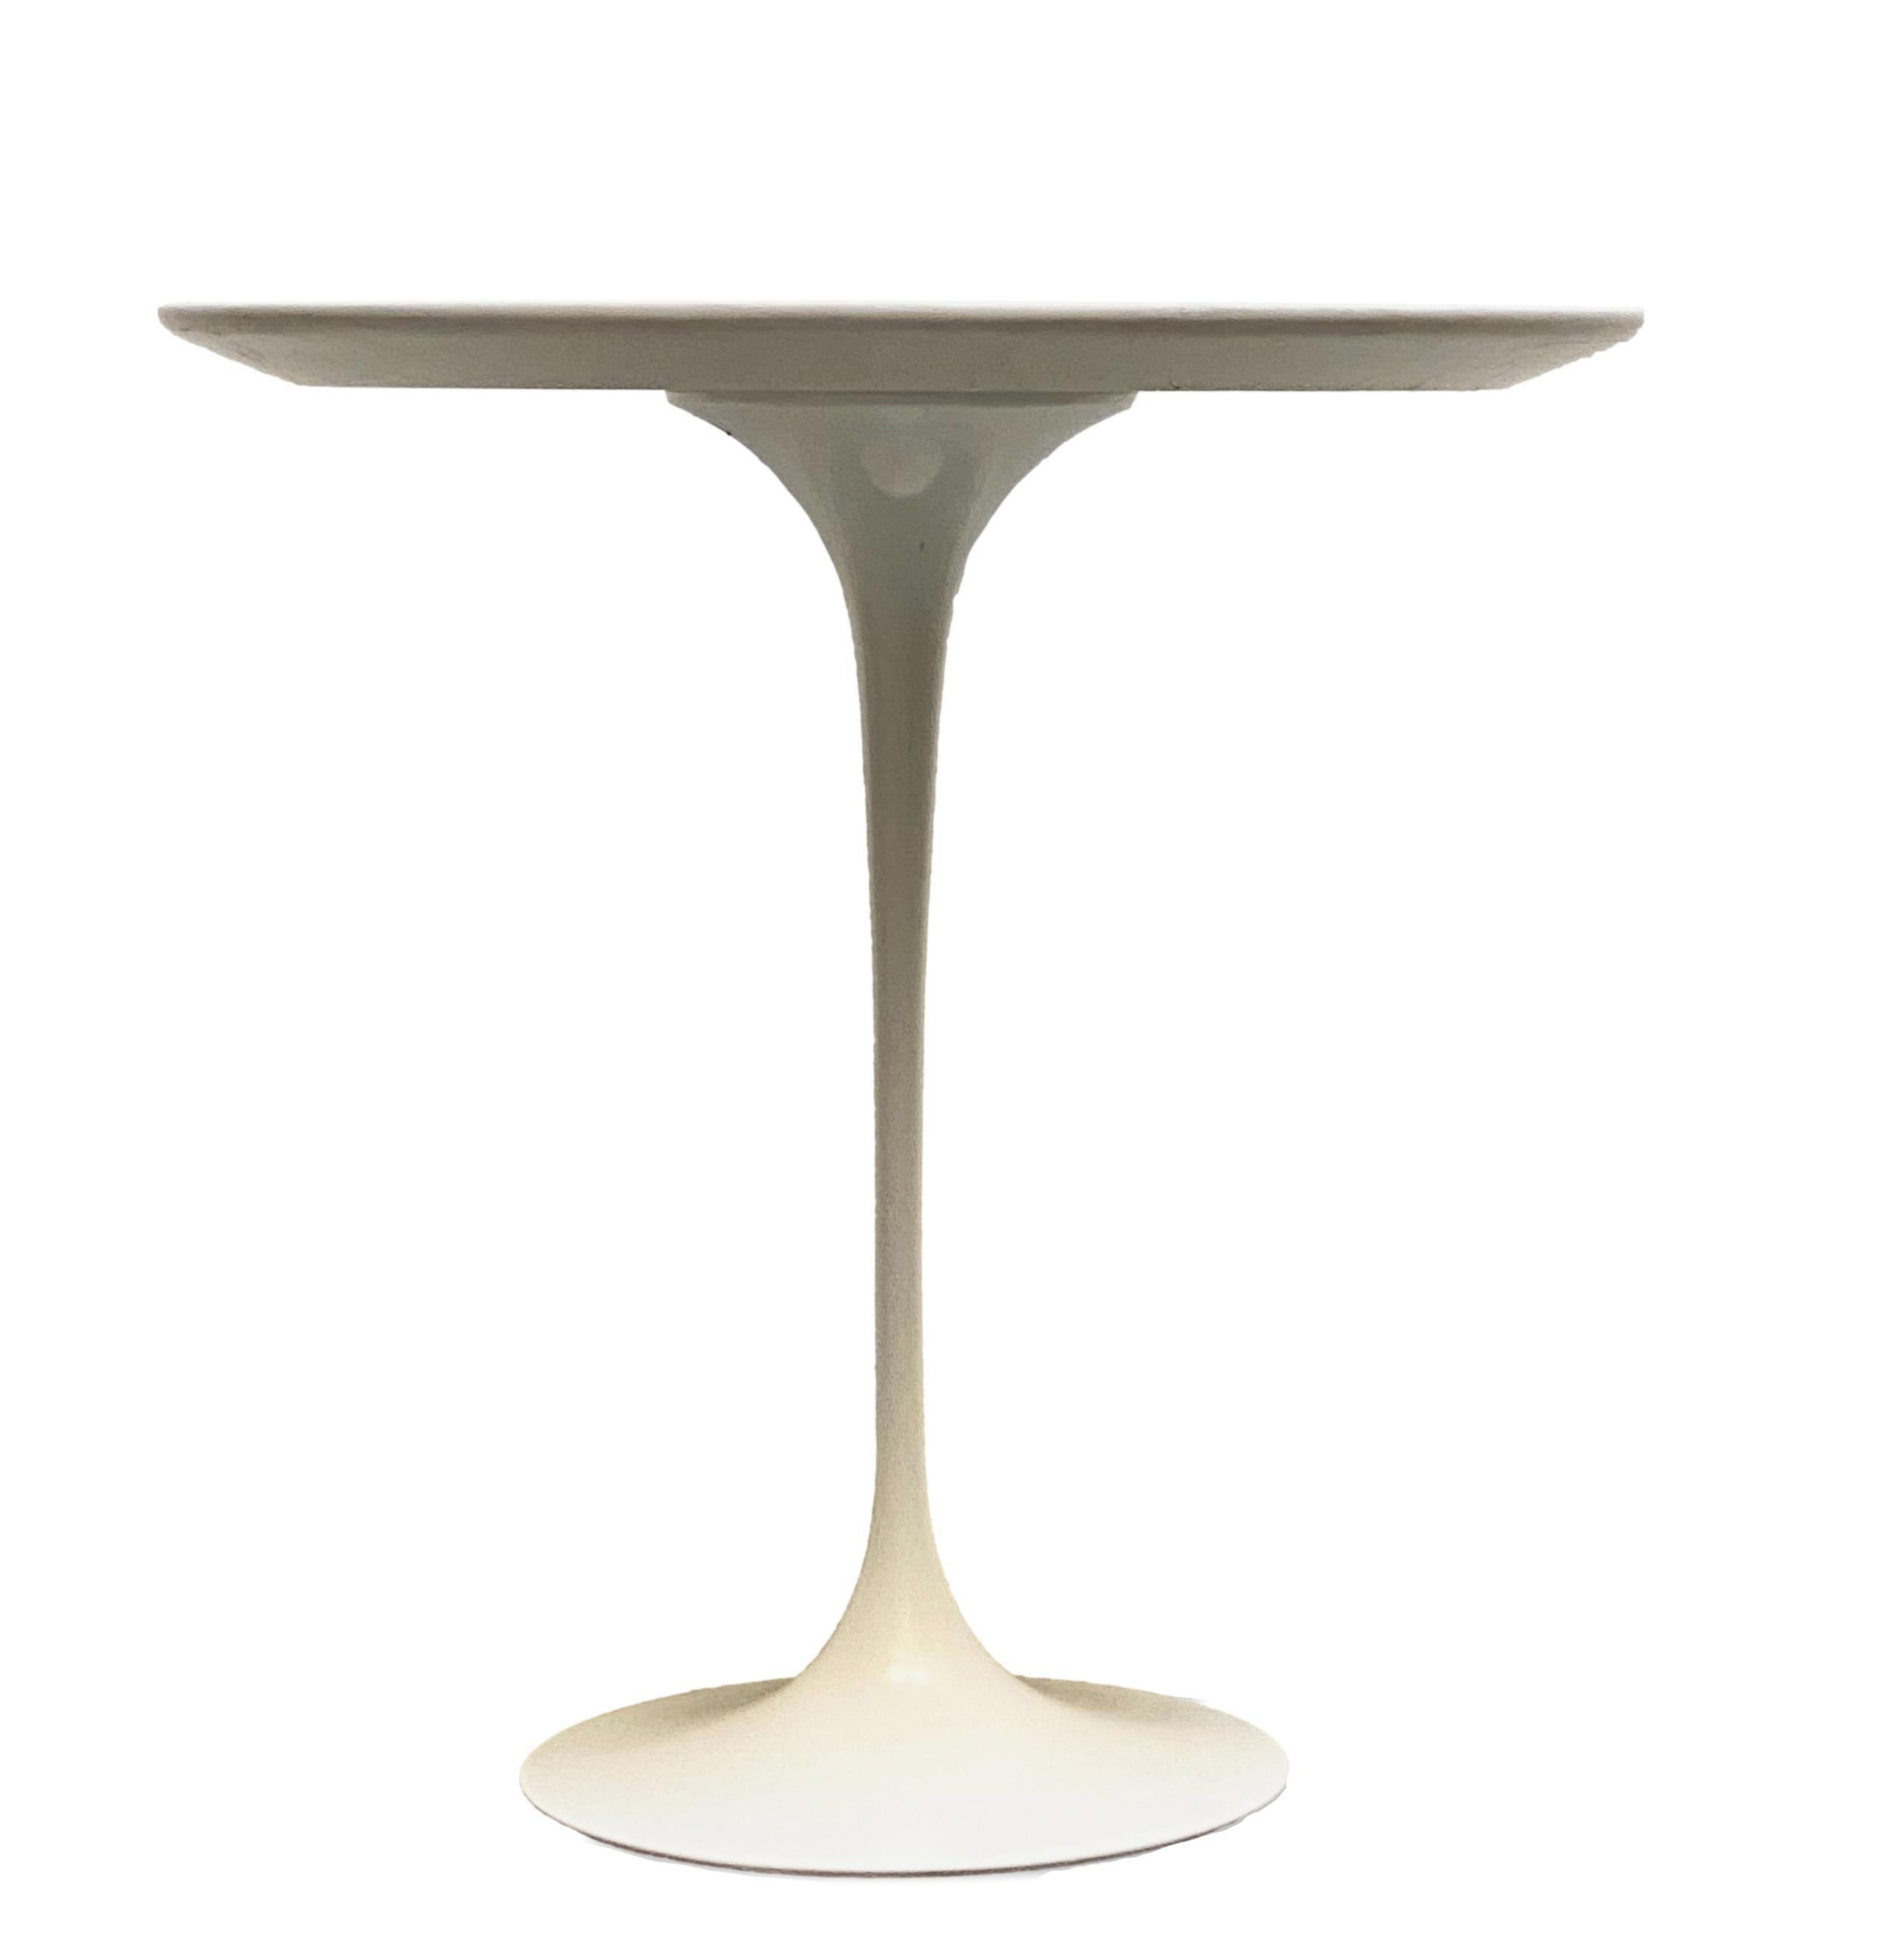 Tulip coffee table by Hero Saarinen with aluminum base and white plastic laminate top, produced by Knoll, designed in 1956, Thanks to its essential lines and organic shapes, the Saarinen table has a design that adapts to all spaces of contemporary